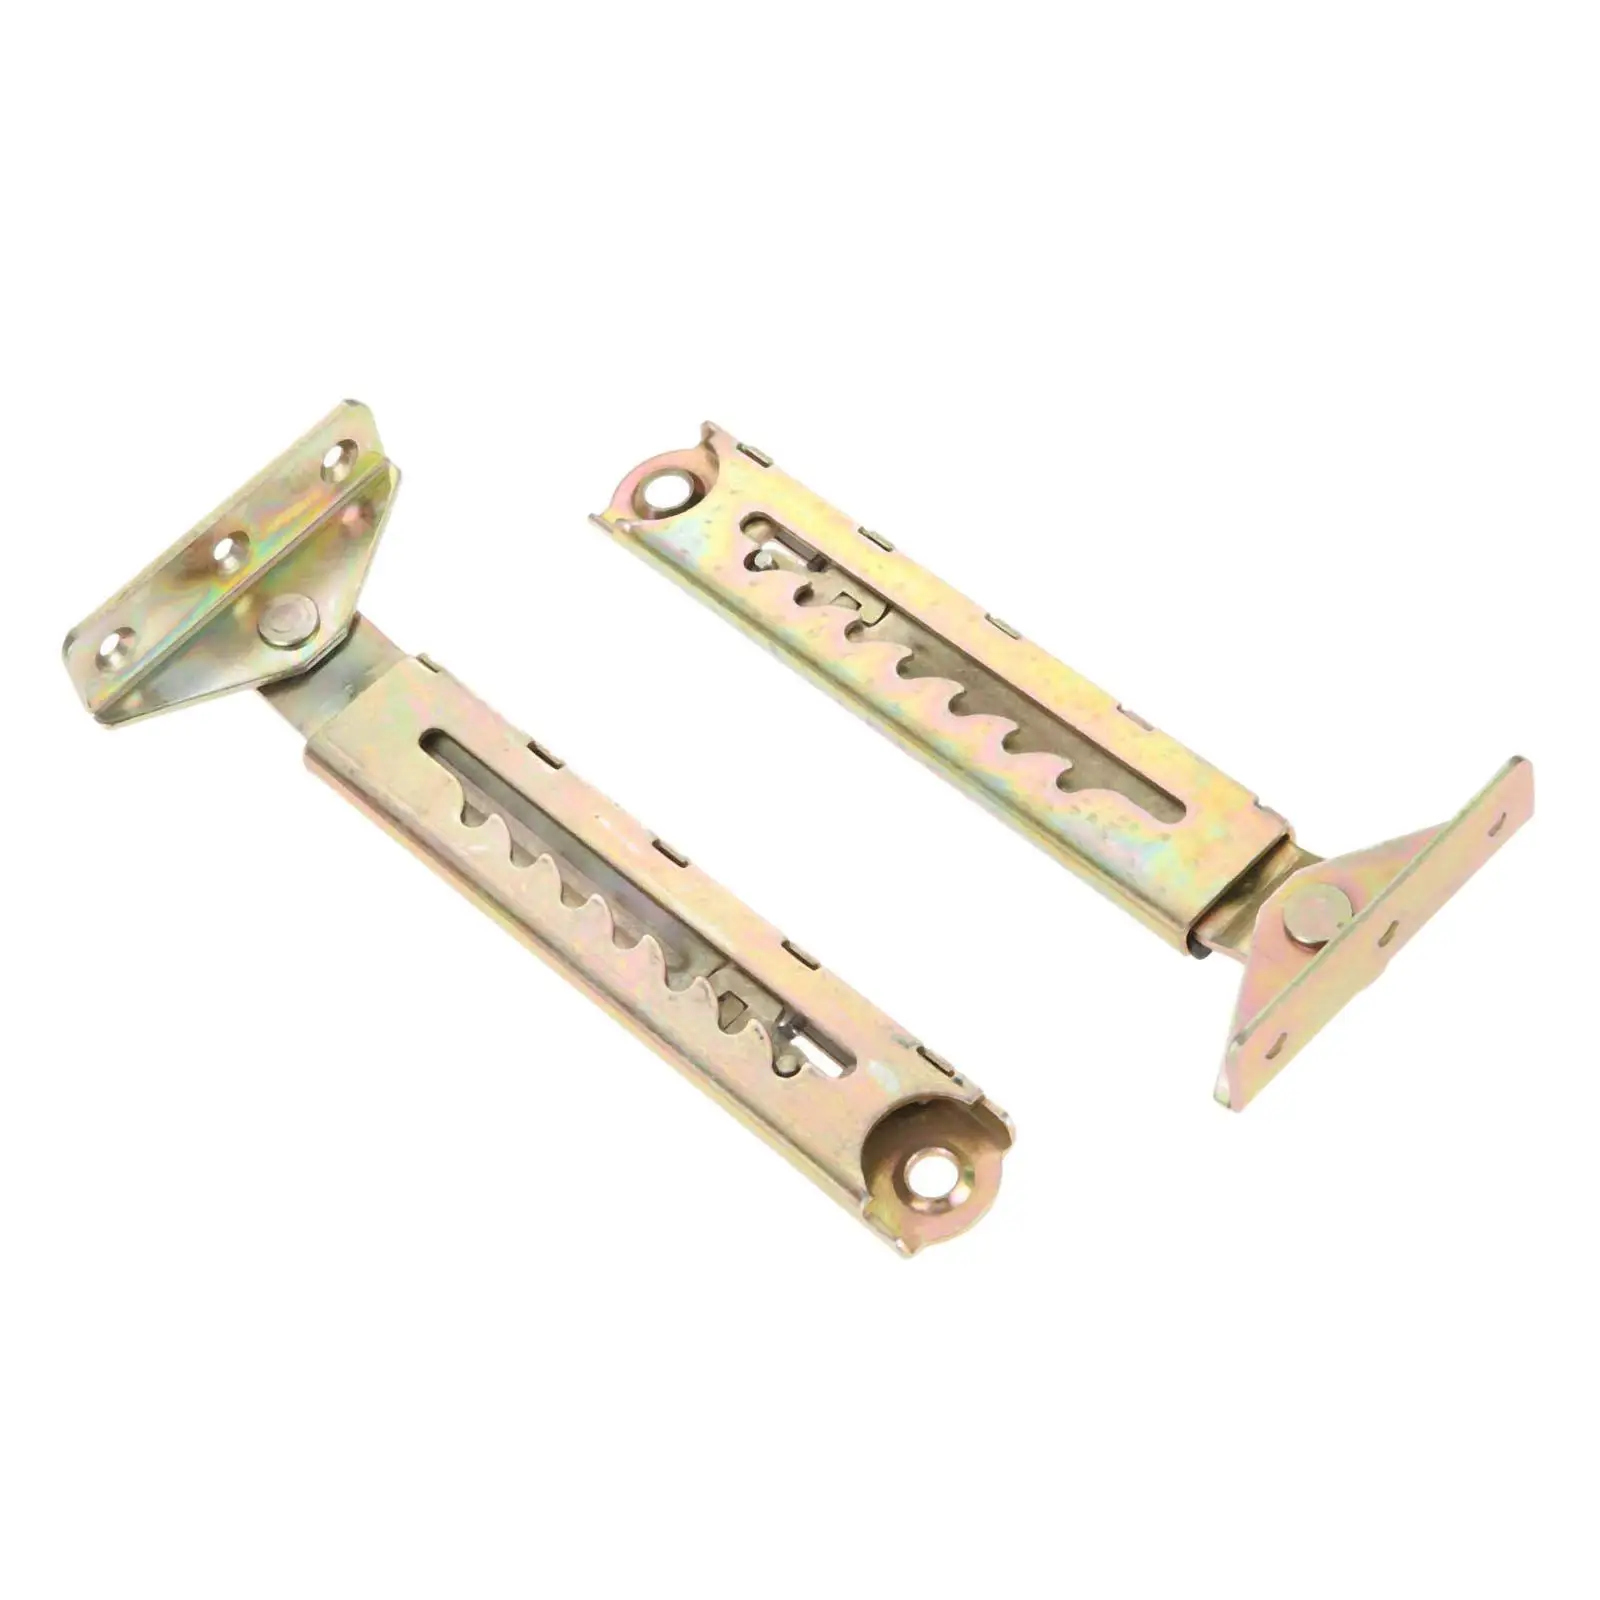 2 Pieces Sofa Lifting Hinge Lifting Bracket Left and Right for Drawing Board